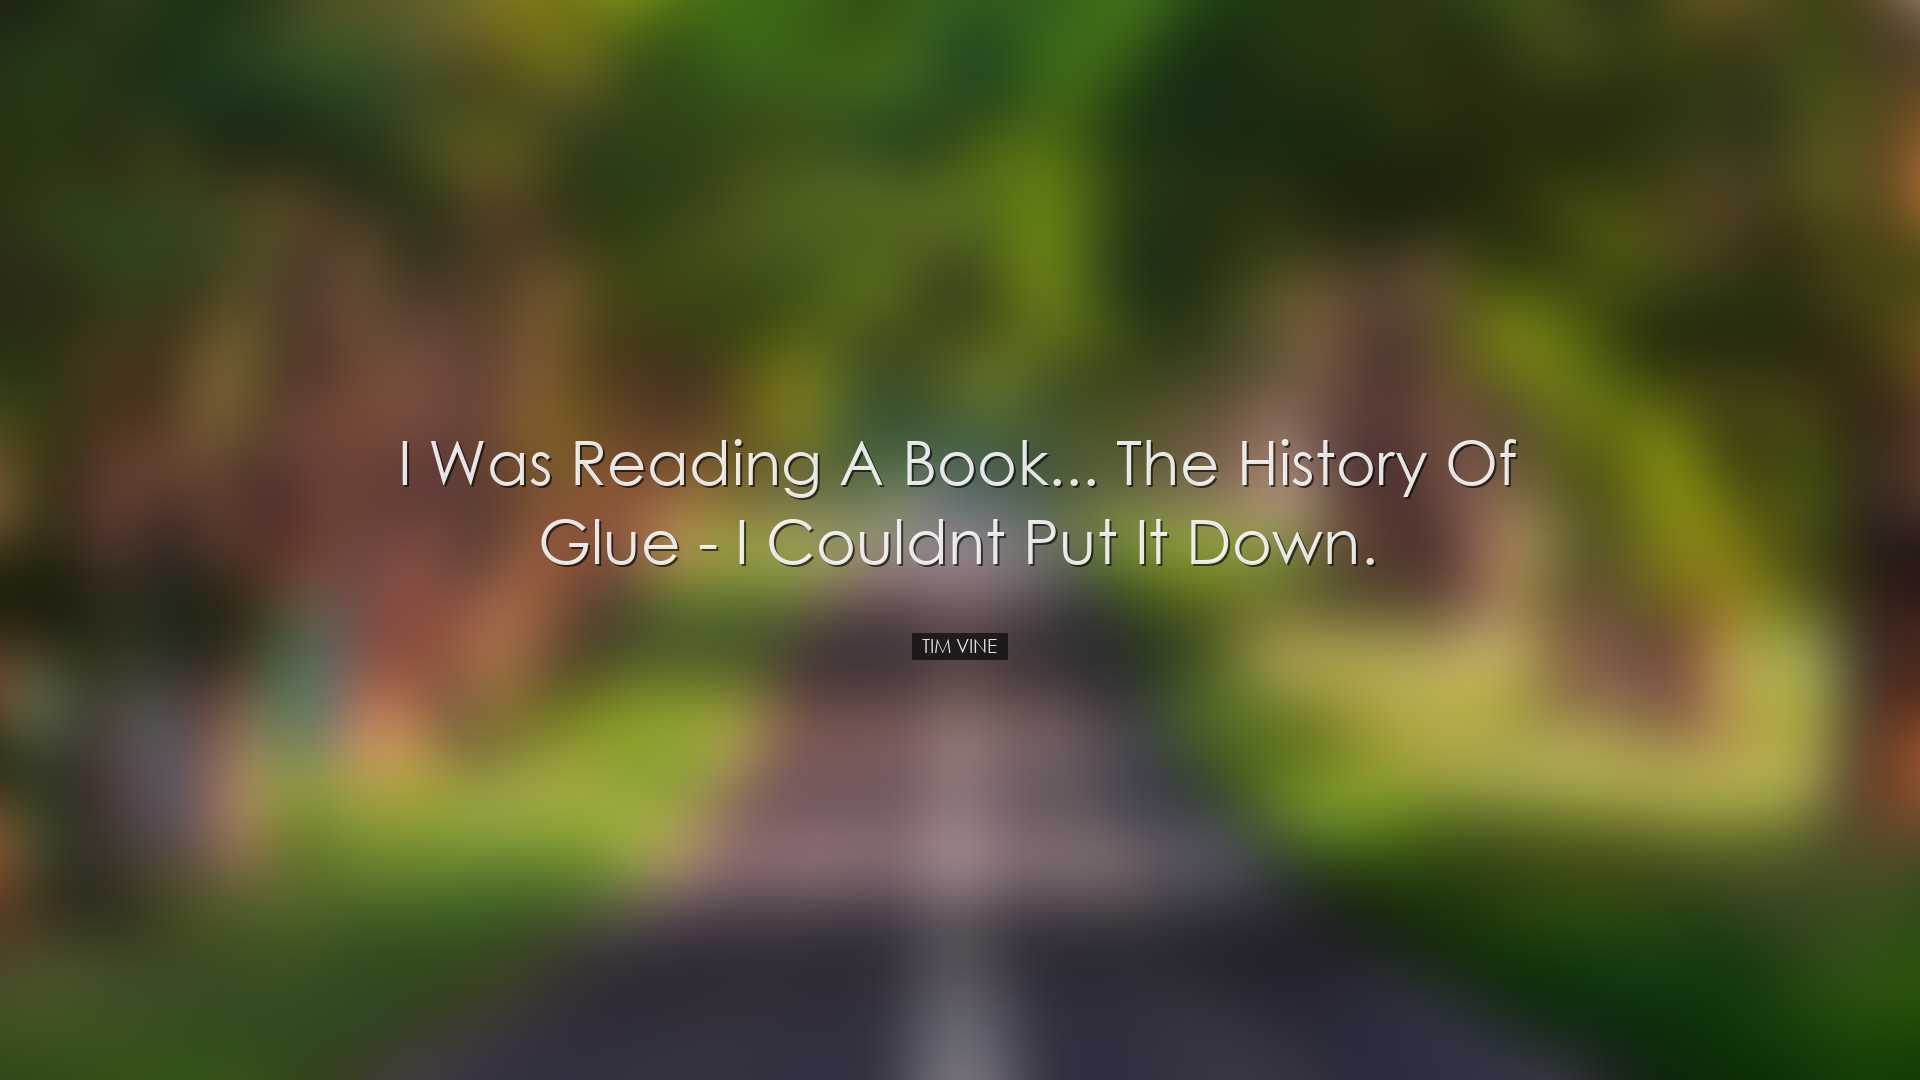 I was reading a book... the history of glue - I couldnt put it dow